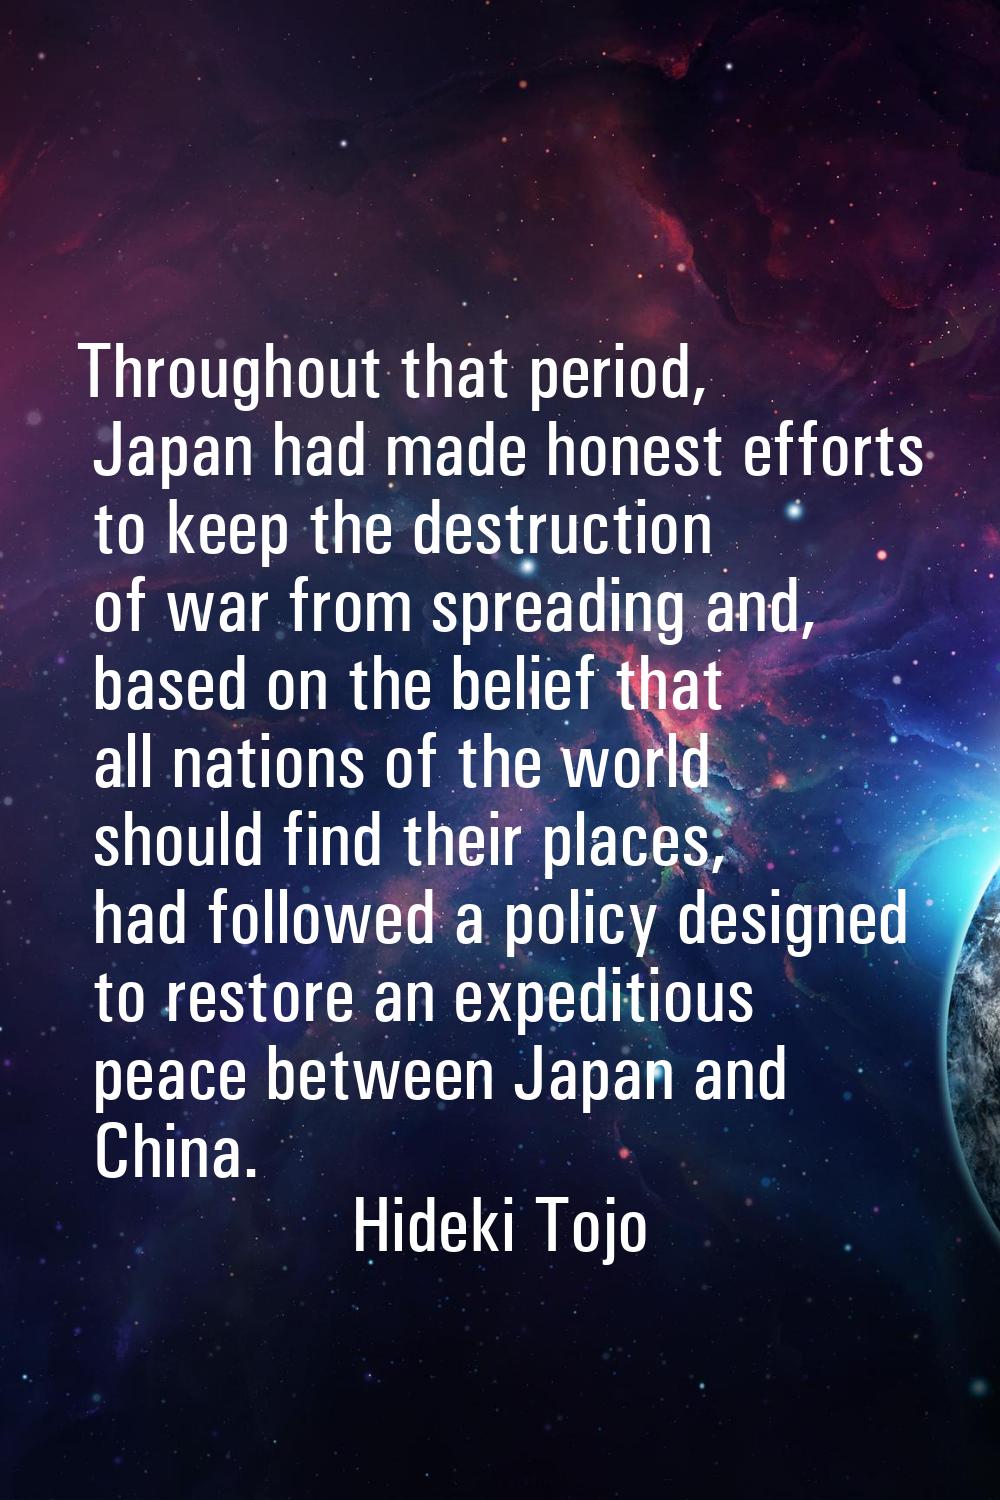 Throughout that period, Japan had made honest efforts to keep the destruction of war from spreading